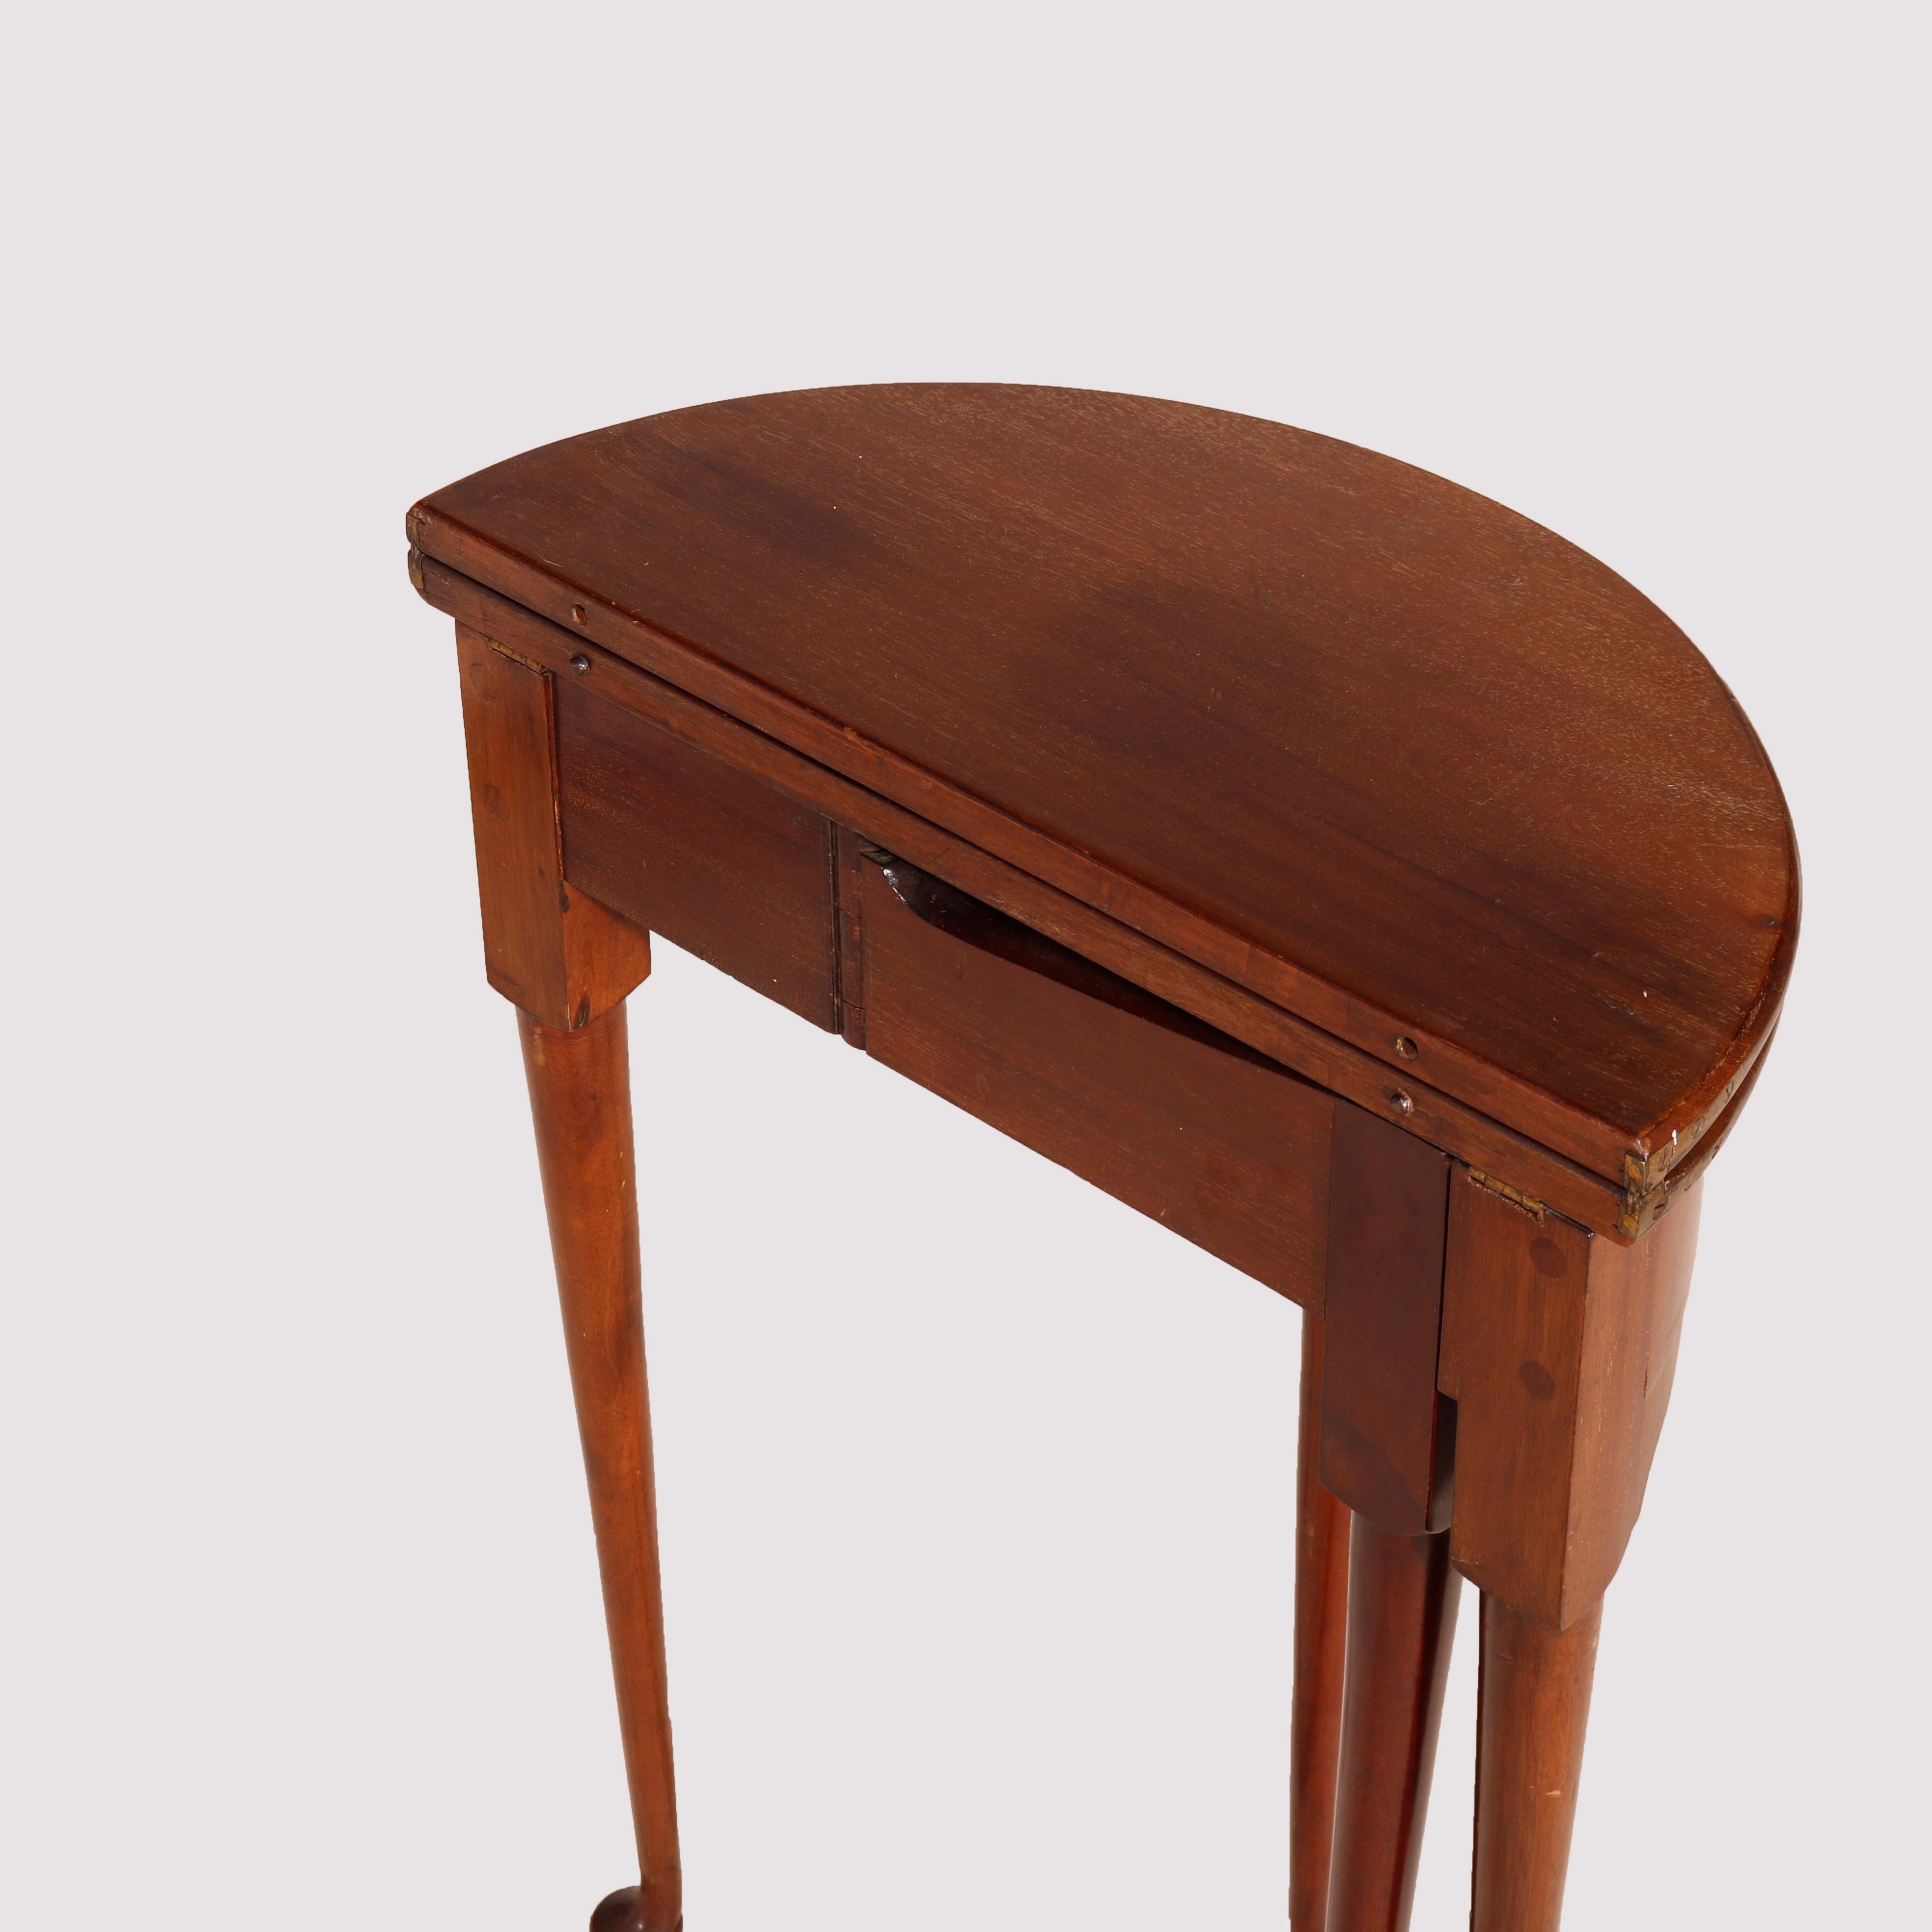 English Queen Anne Mahogany Demilune Lift Top Table, 20th Century For Sale 3